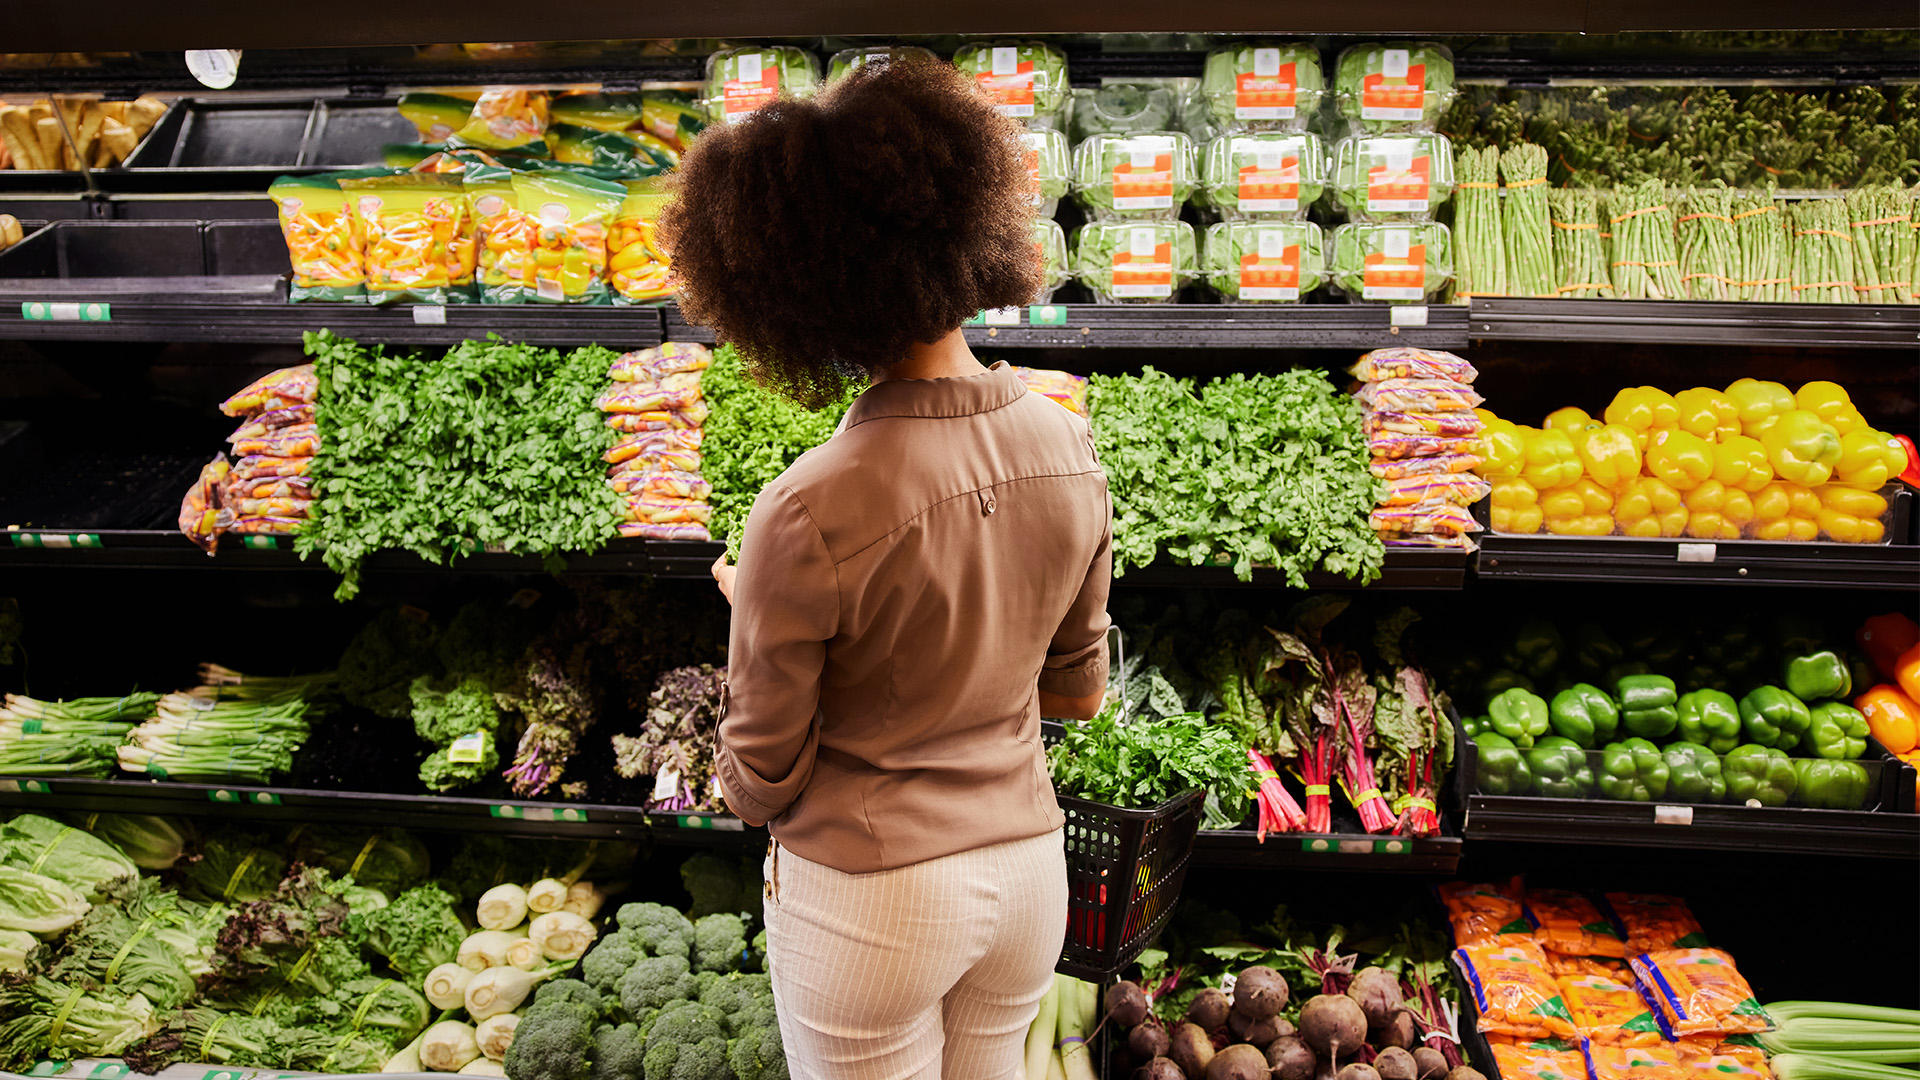 5 Strategies for Healthier Grocery Shopping